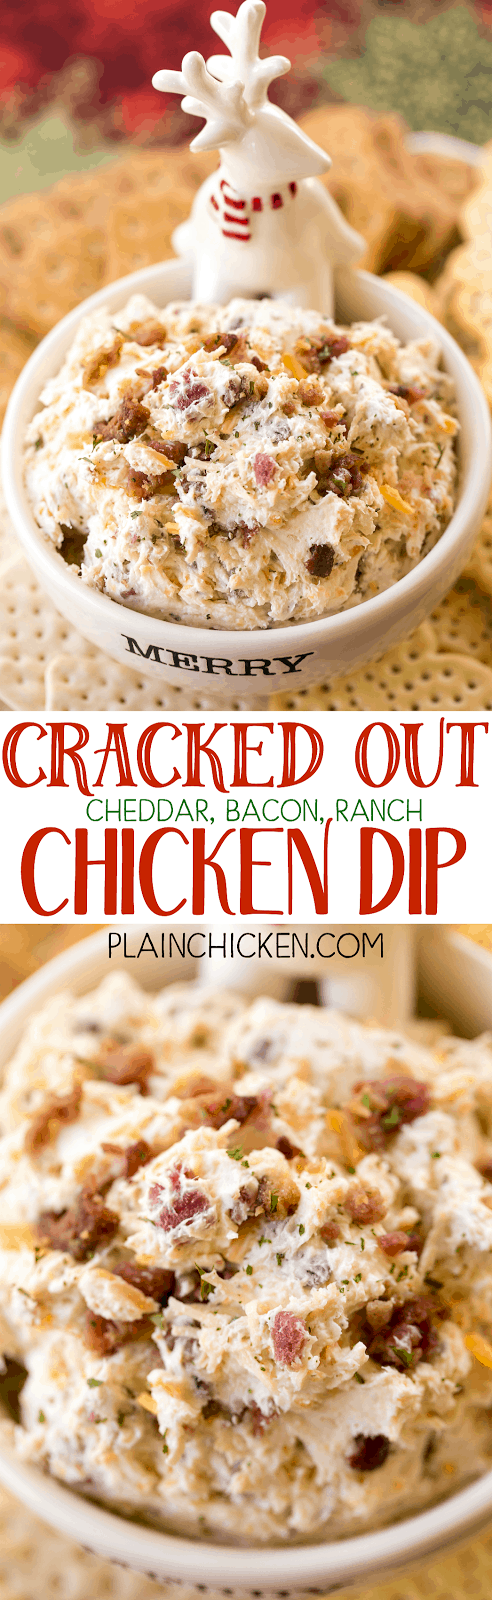 Cracked Out Chicken Dip - this stuff is SO addicting! CRAZY good!! Chicken, cream cheese, ranch mix, bacon, cheddar cheese and milk. This makes a ton! Great for parties! Can make ahead and refrigerate until ready to serve. Everyone LOVES this dip!